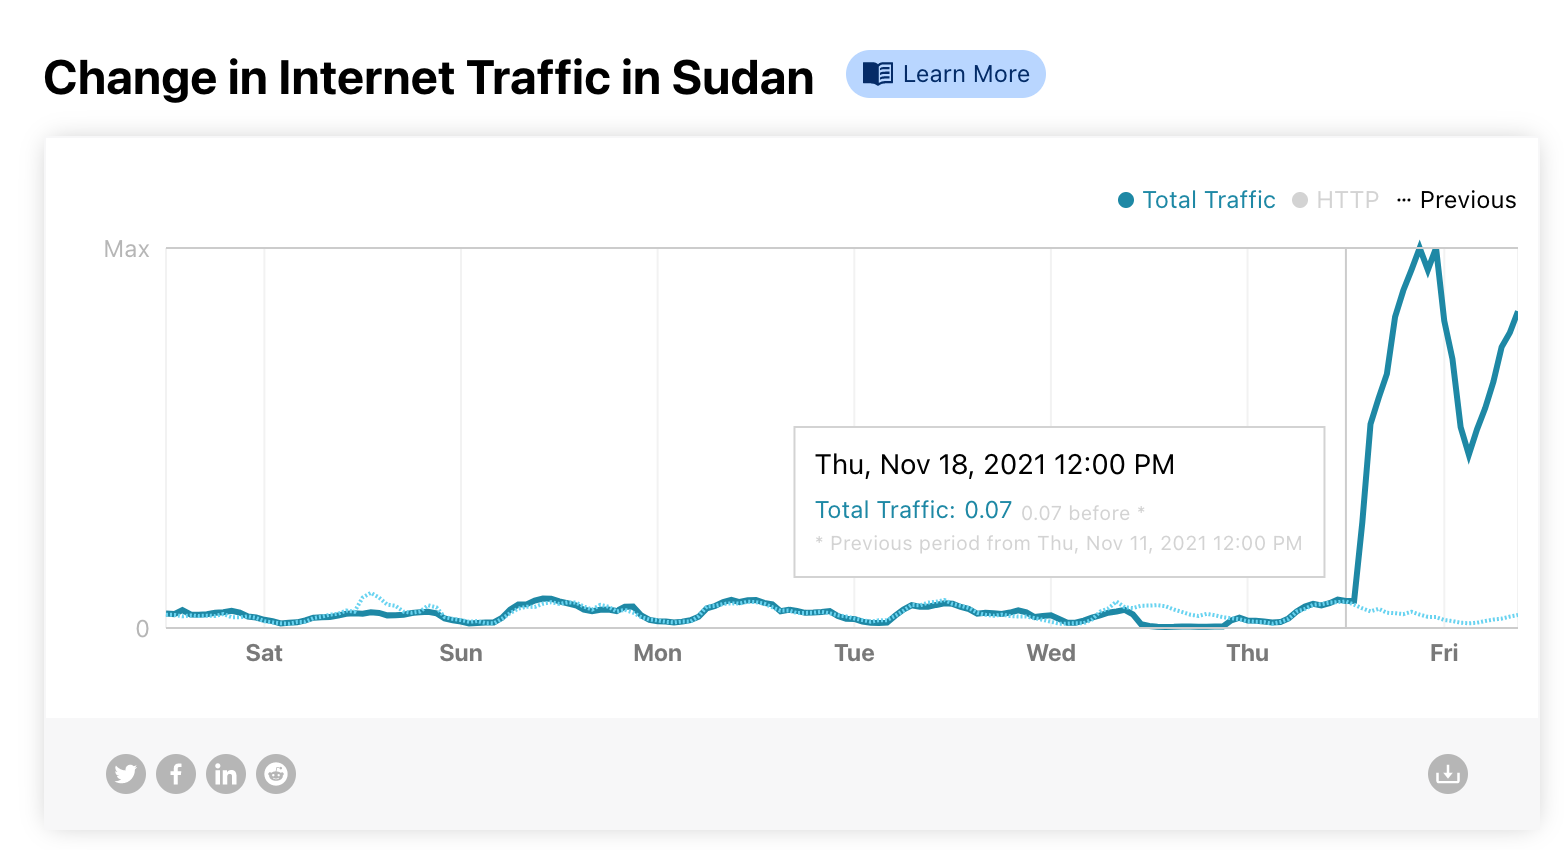 Sudan was cut off from the Internet for 25 days